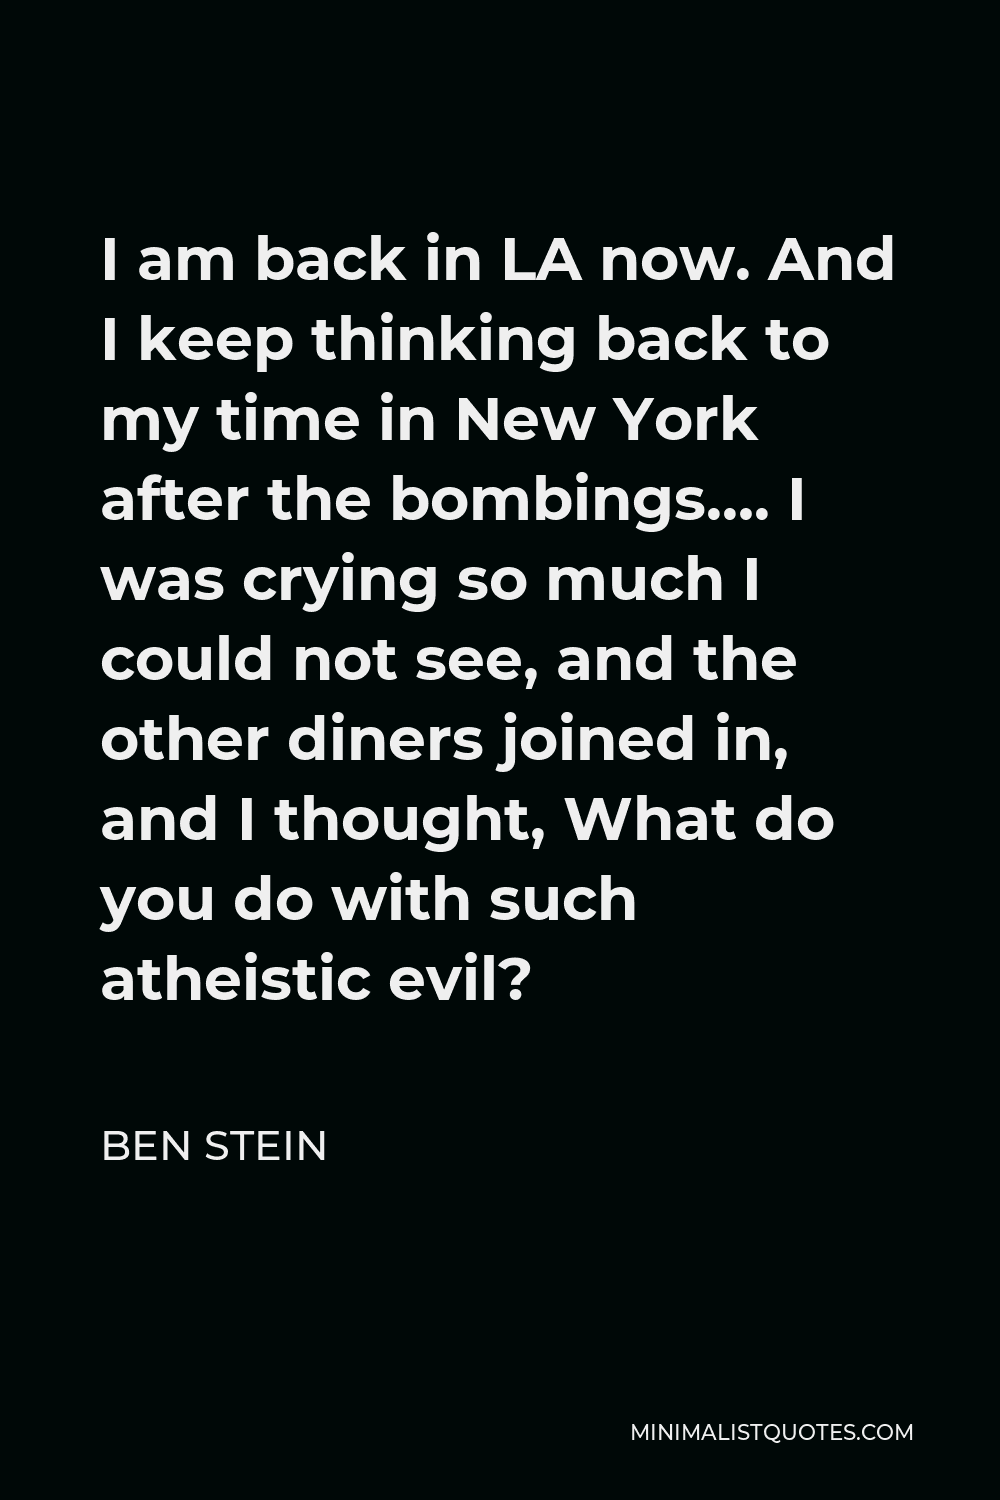 Ben Stein Quote - I am back in LA now. And I keep thinking back to my time in New York after the bombings…. I was crying so much I could not see, and the other diners joined in, and I thought, What do you do with such atheistic evil?